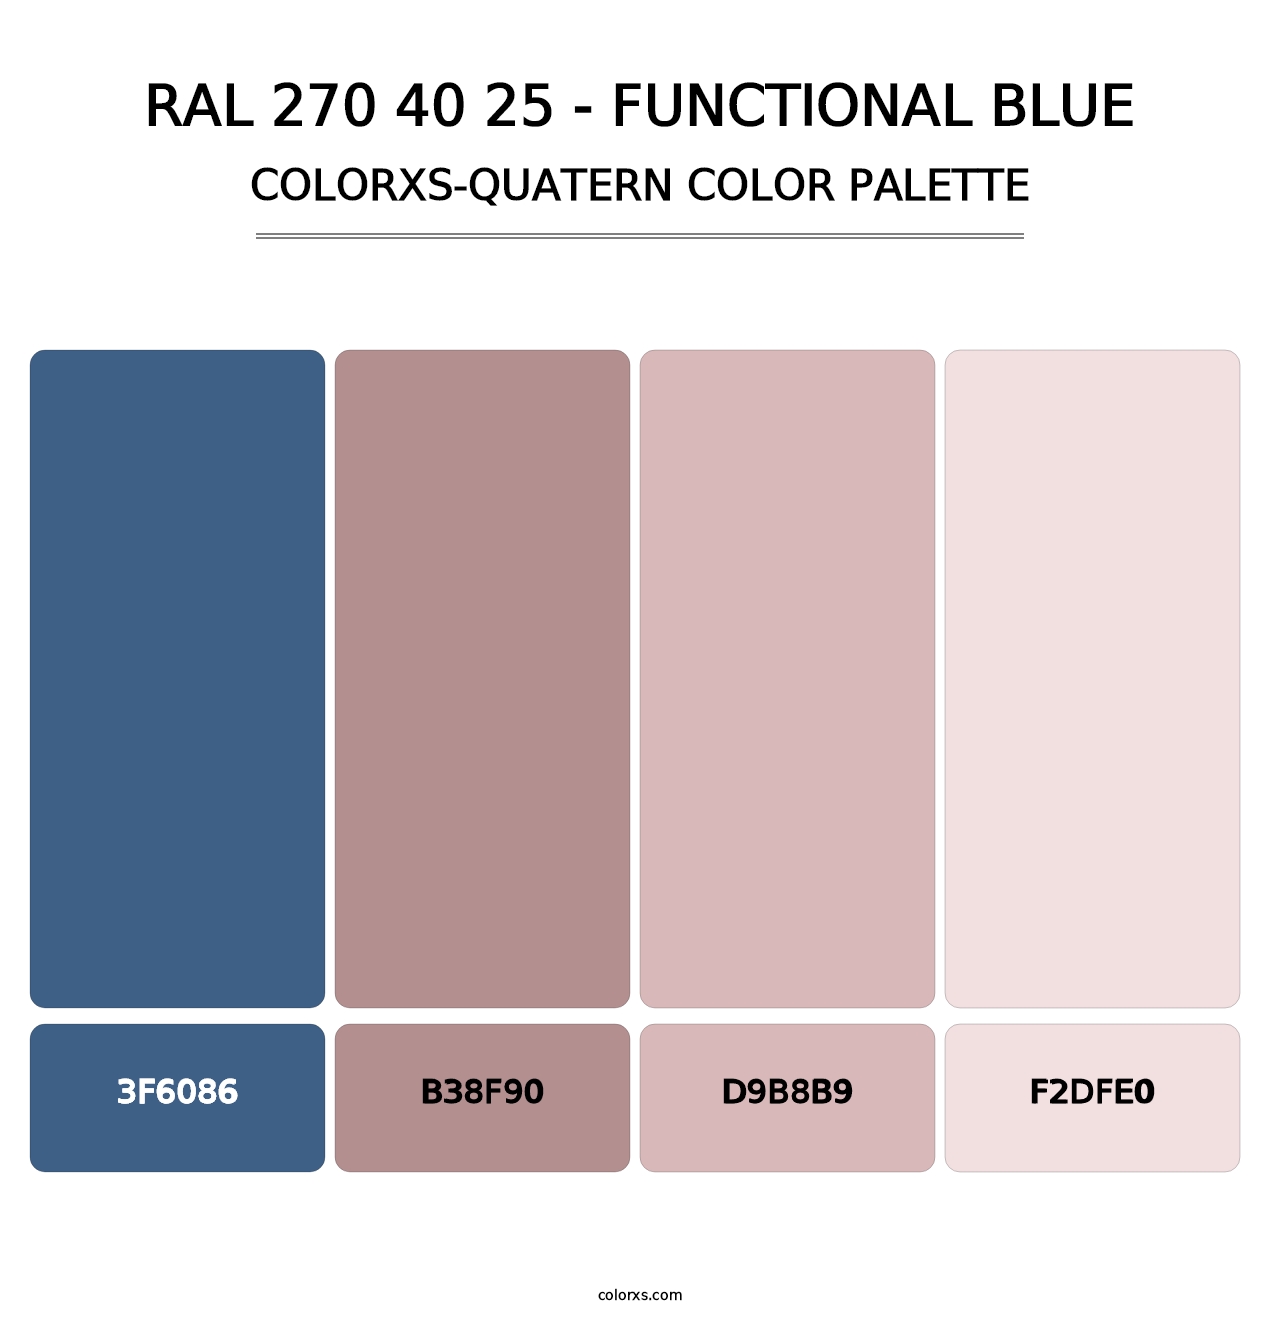 RAL 270 40 25 - Functional Blue - Colorxs Quatern Palette